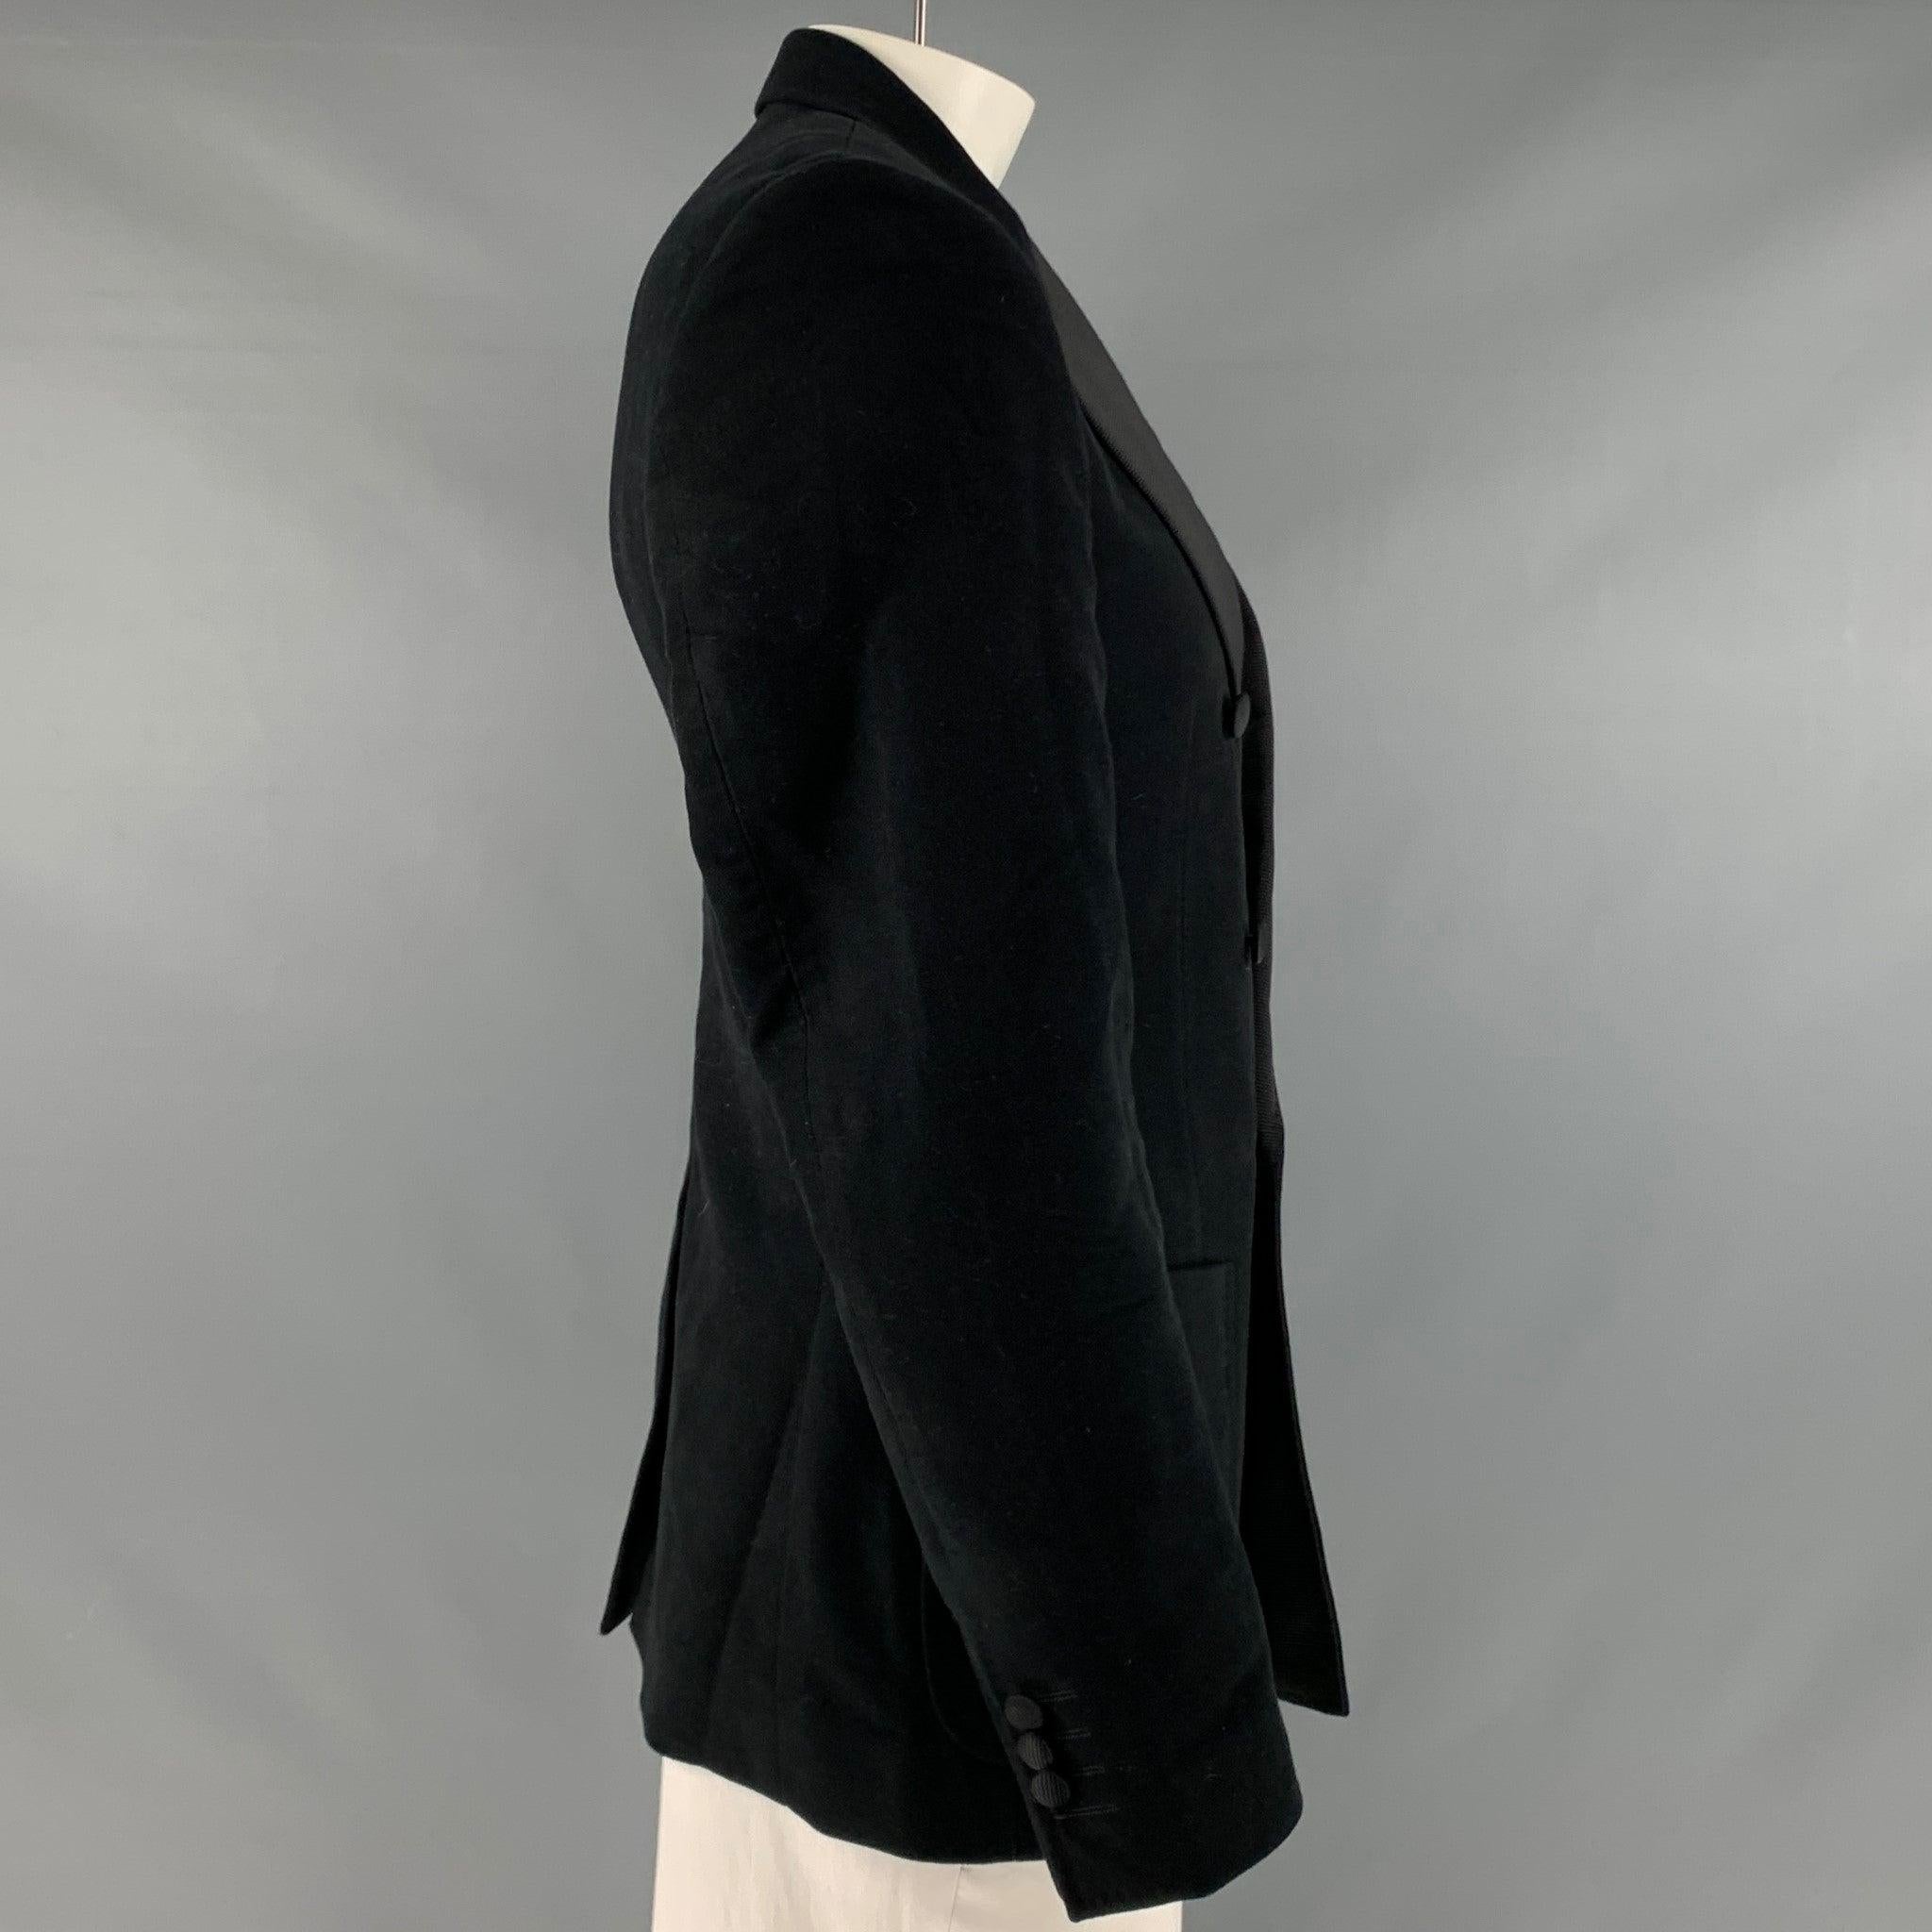 DOLCE & GABBANA sport coat
in a black cotton blend featuring peak lapel, double breasted style, single vented back, and single button closure. Made in Italy.Excellent Pre-Owned Condition. 

Marked:   IT 52 

Measurements: 
 
Shoulder: 18 inches